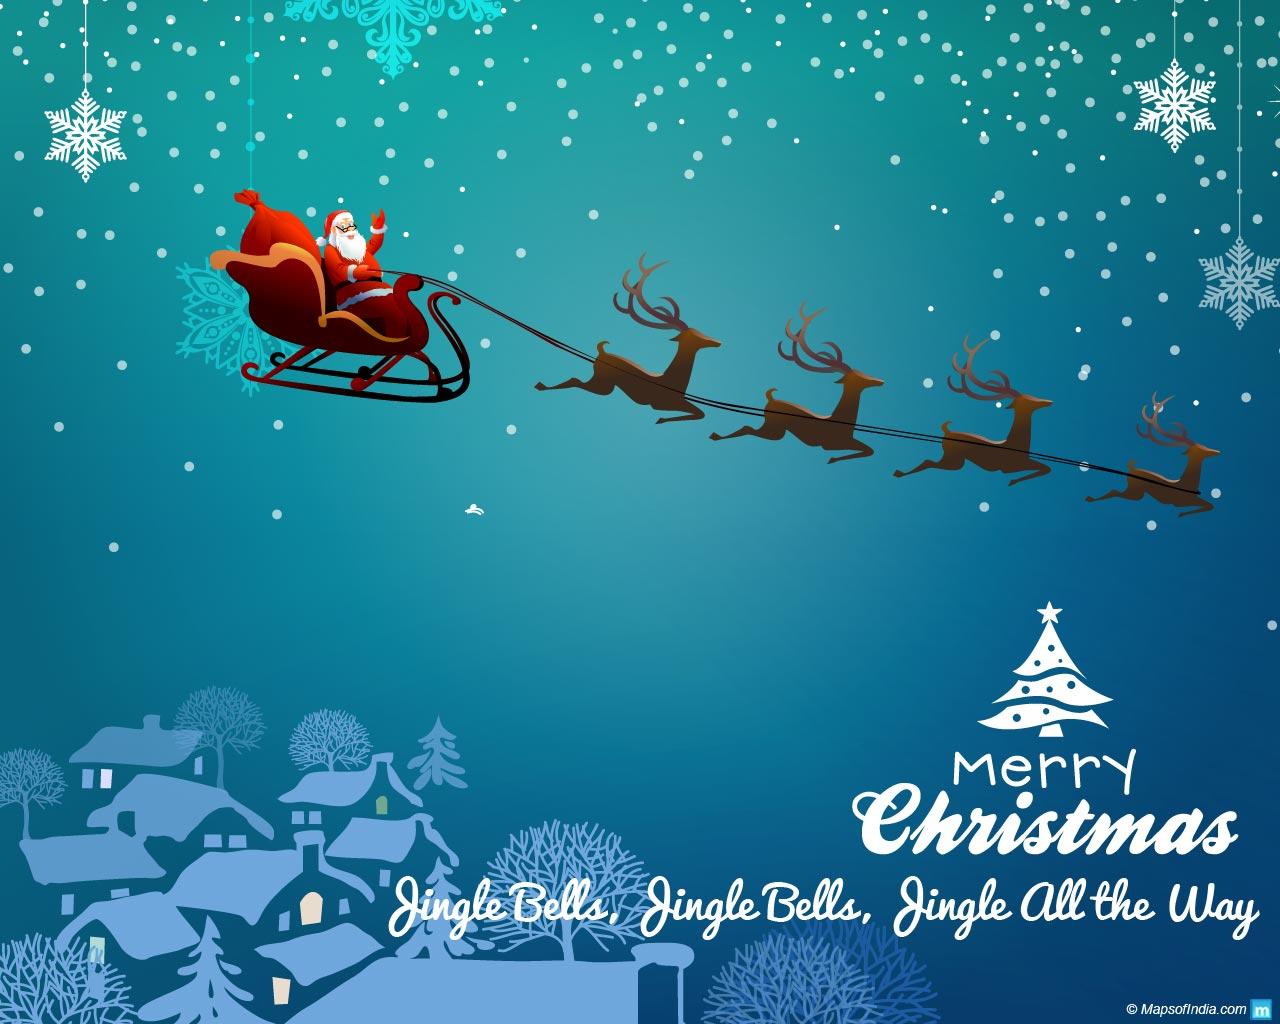 Christmas Wallpapers and Image 2018, Free Download Christmas Wallpapers